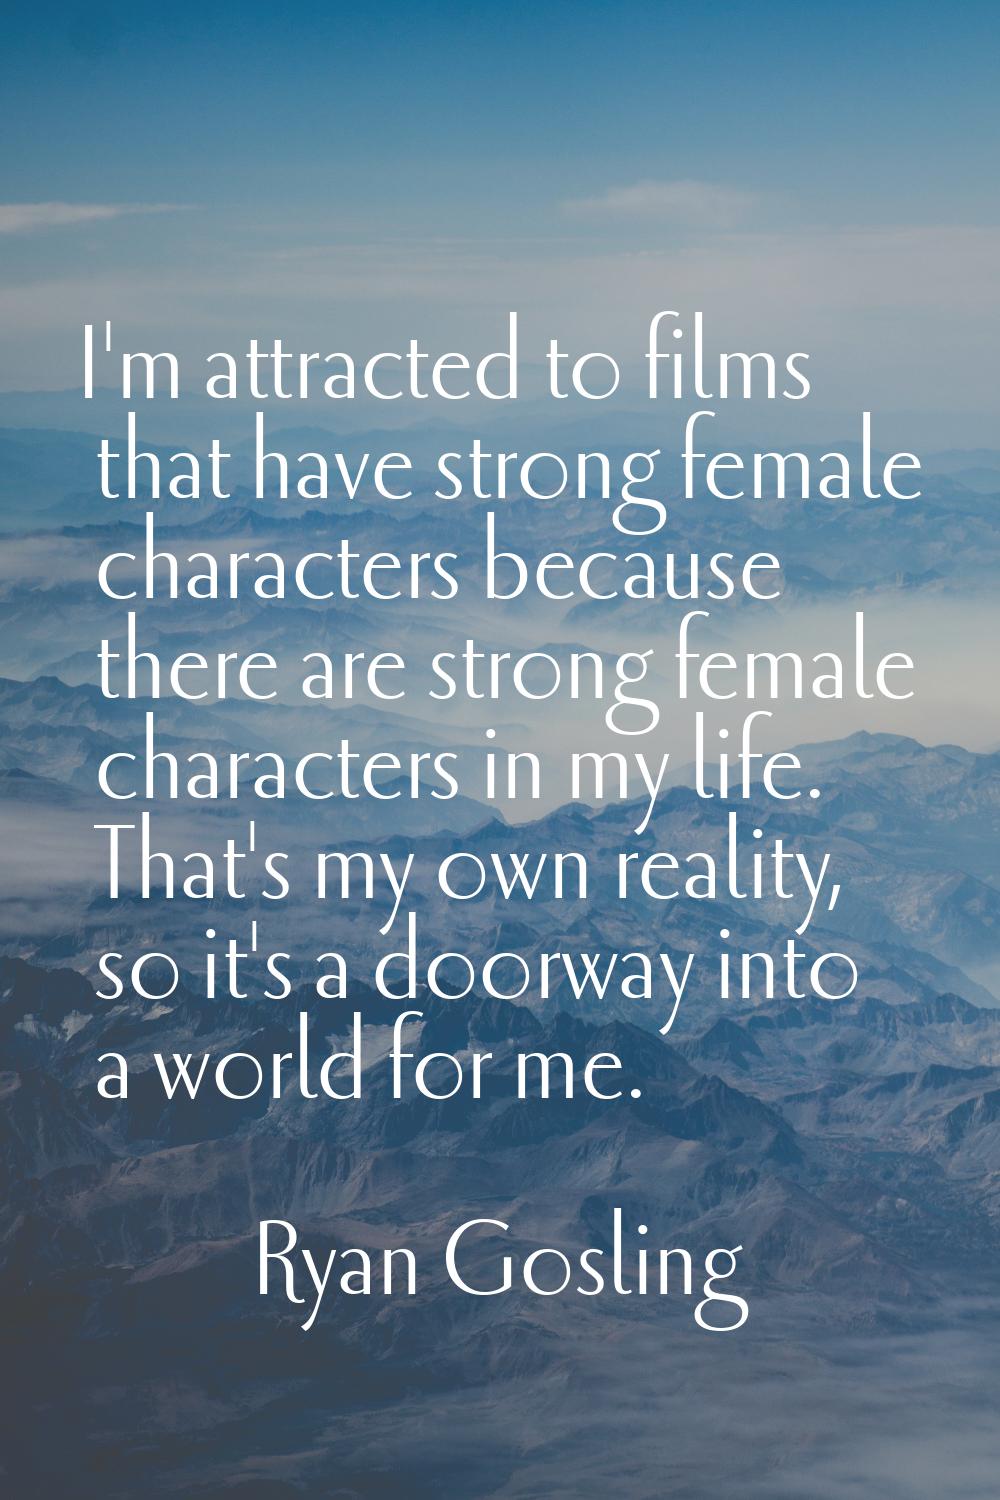 I'm attracted to films that have strong female characters because there are strong female character